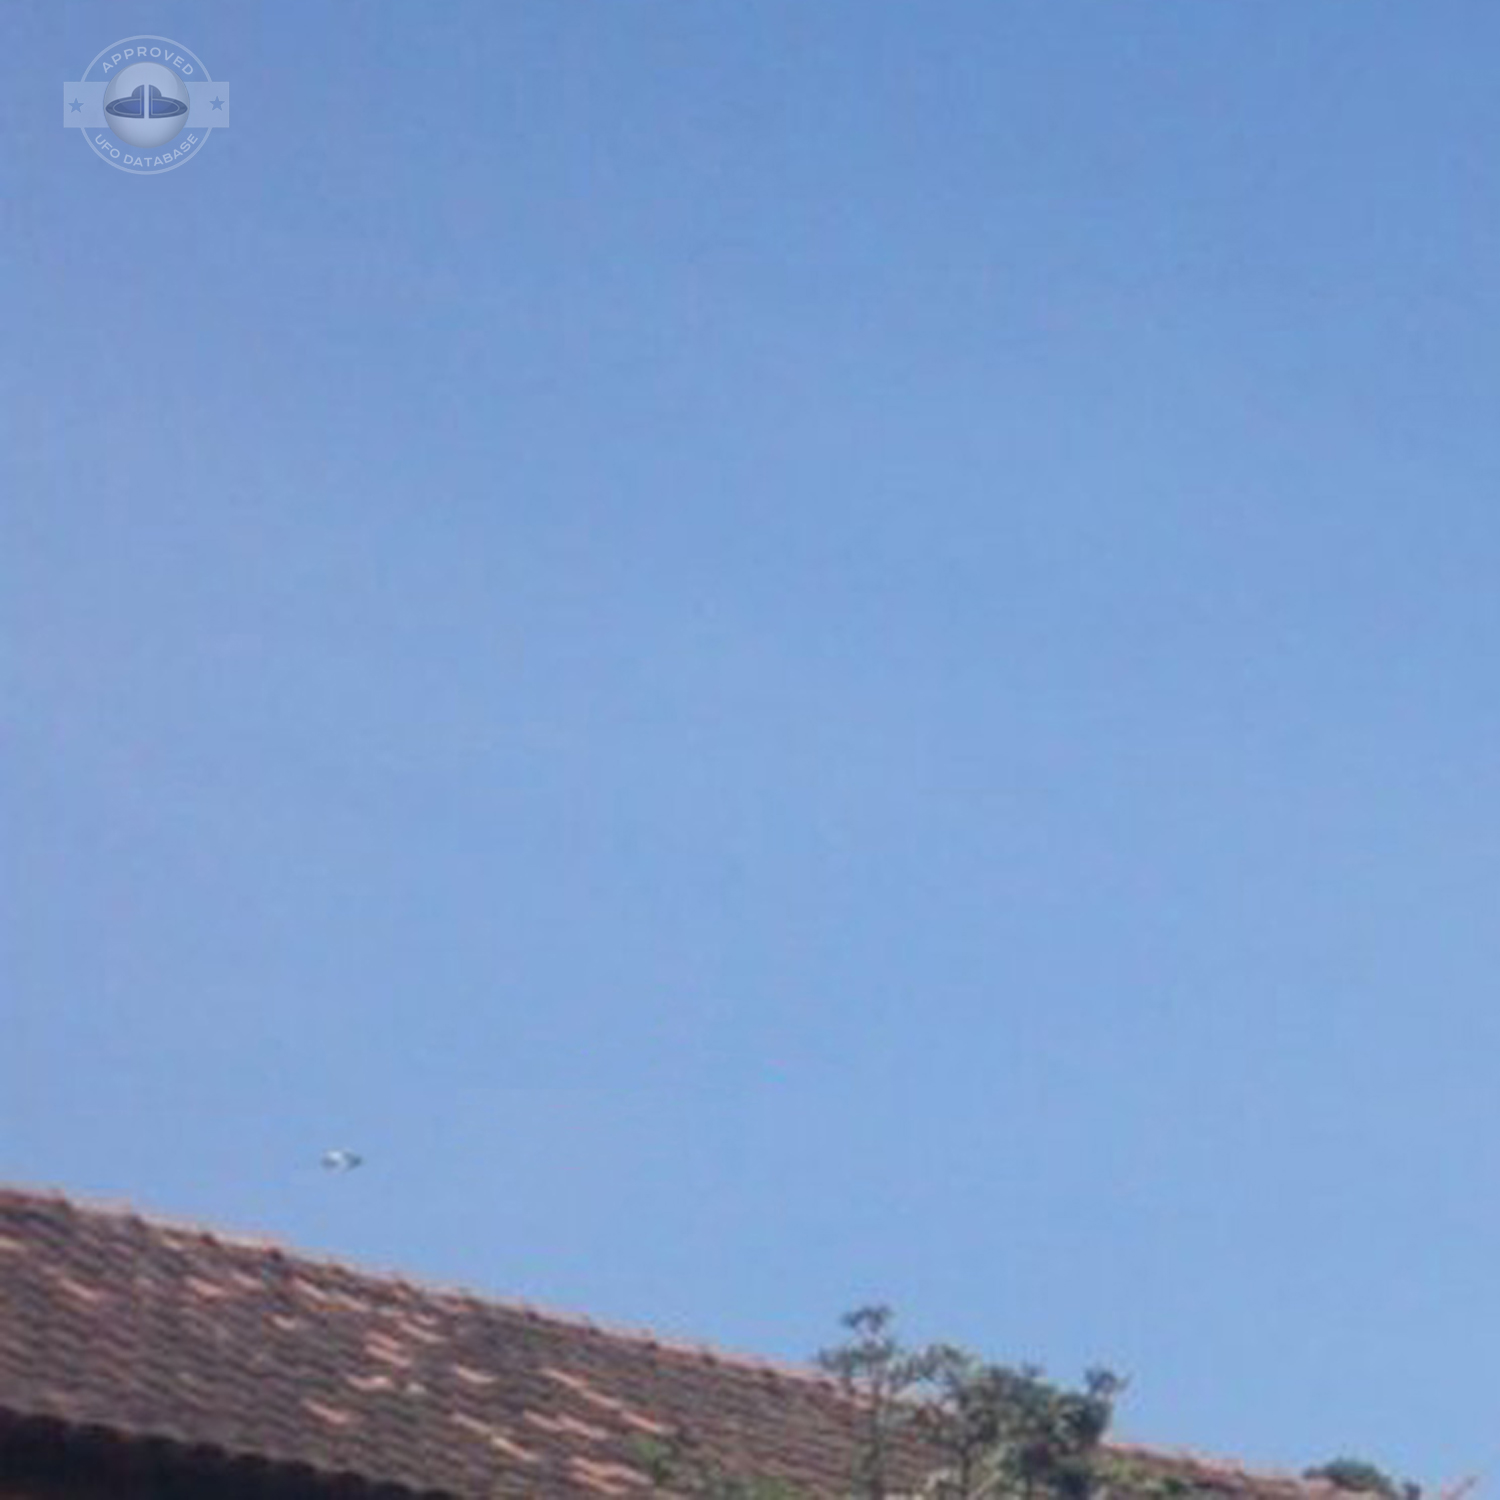 Fast Saucer UFO over houses of Ibirite, Minas Gerais, Brazil | 2008 UFO Picture #214-2